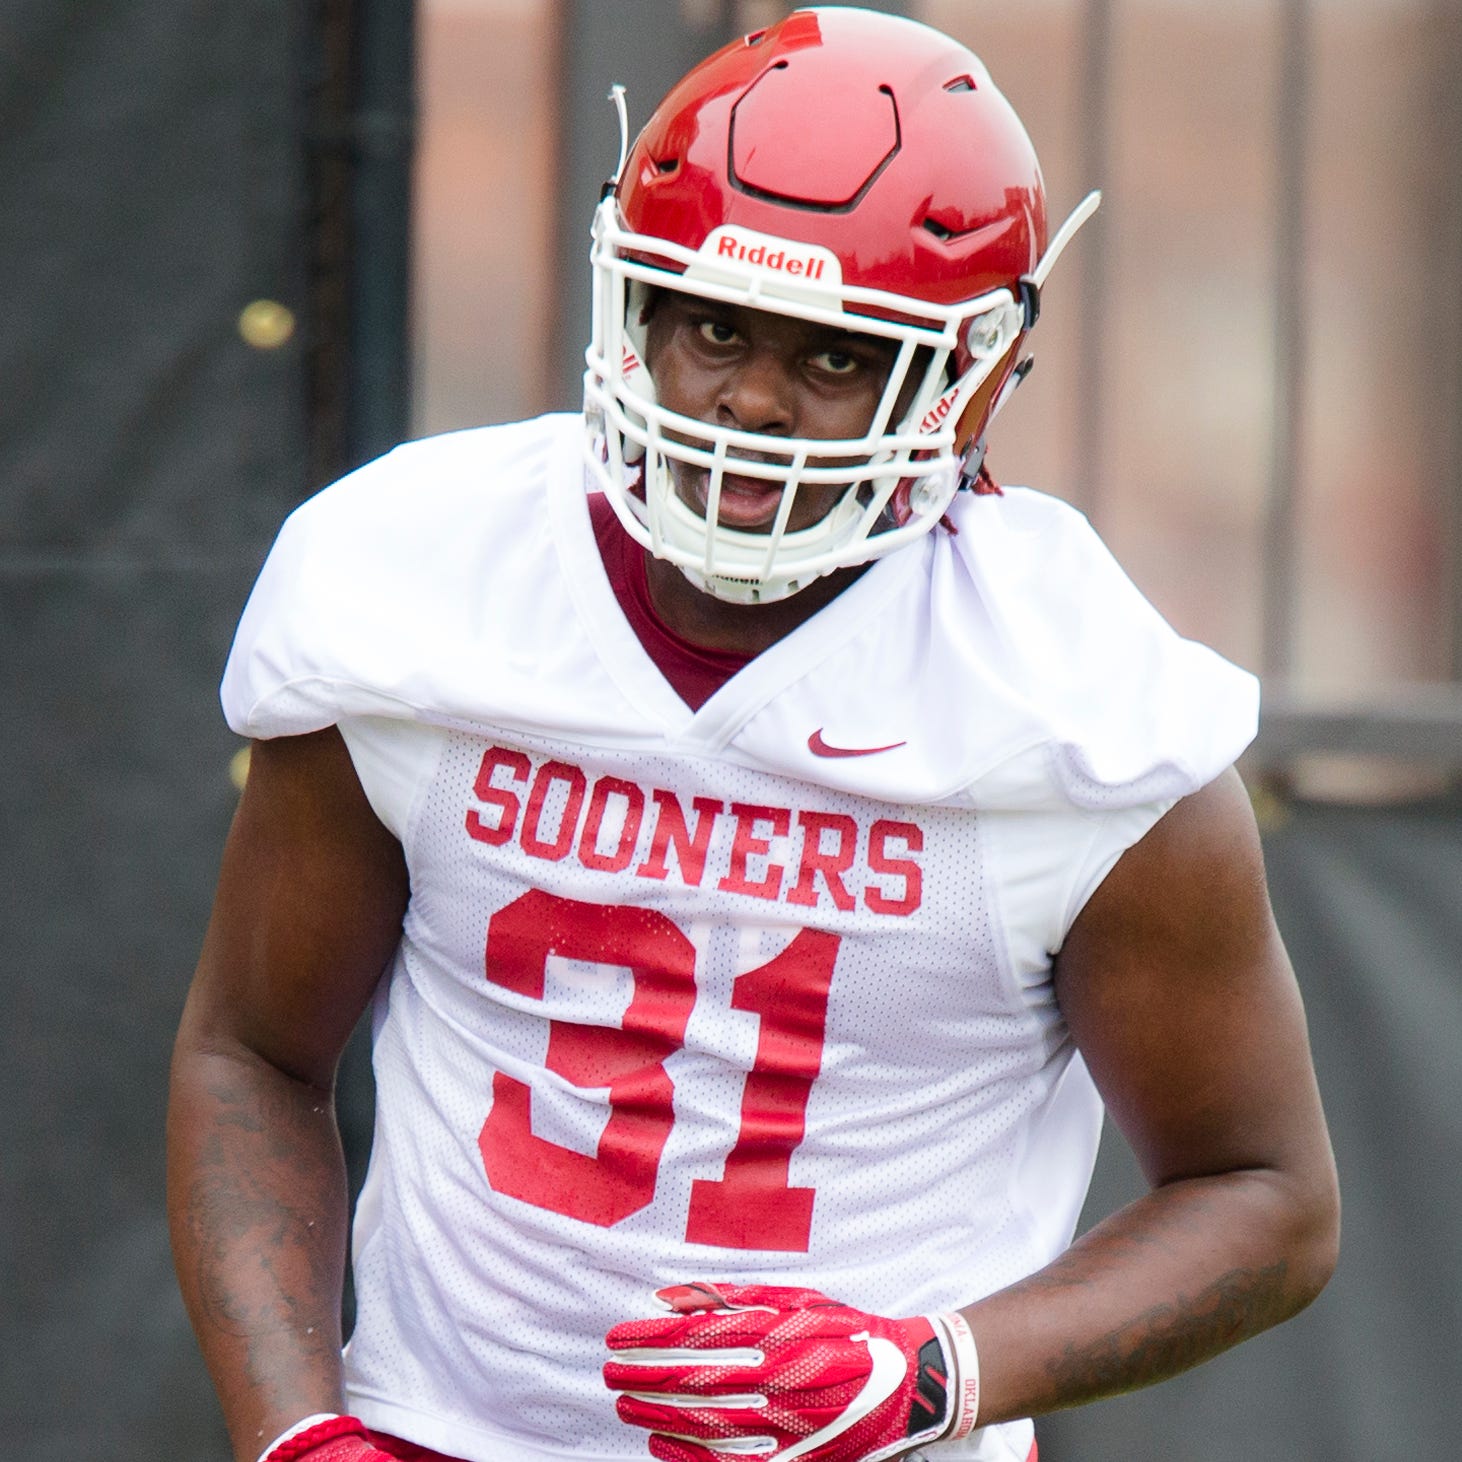 Jalen Redmond returns to OU's 2021 season after opting out last year